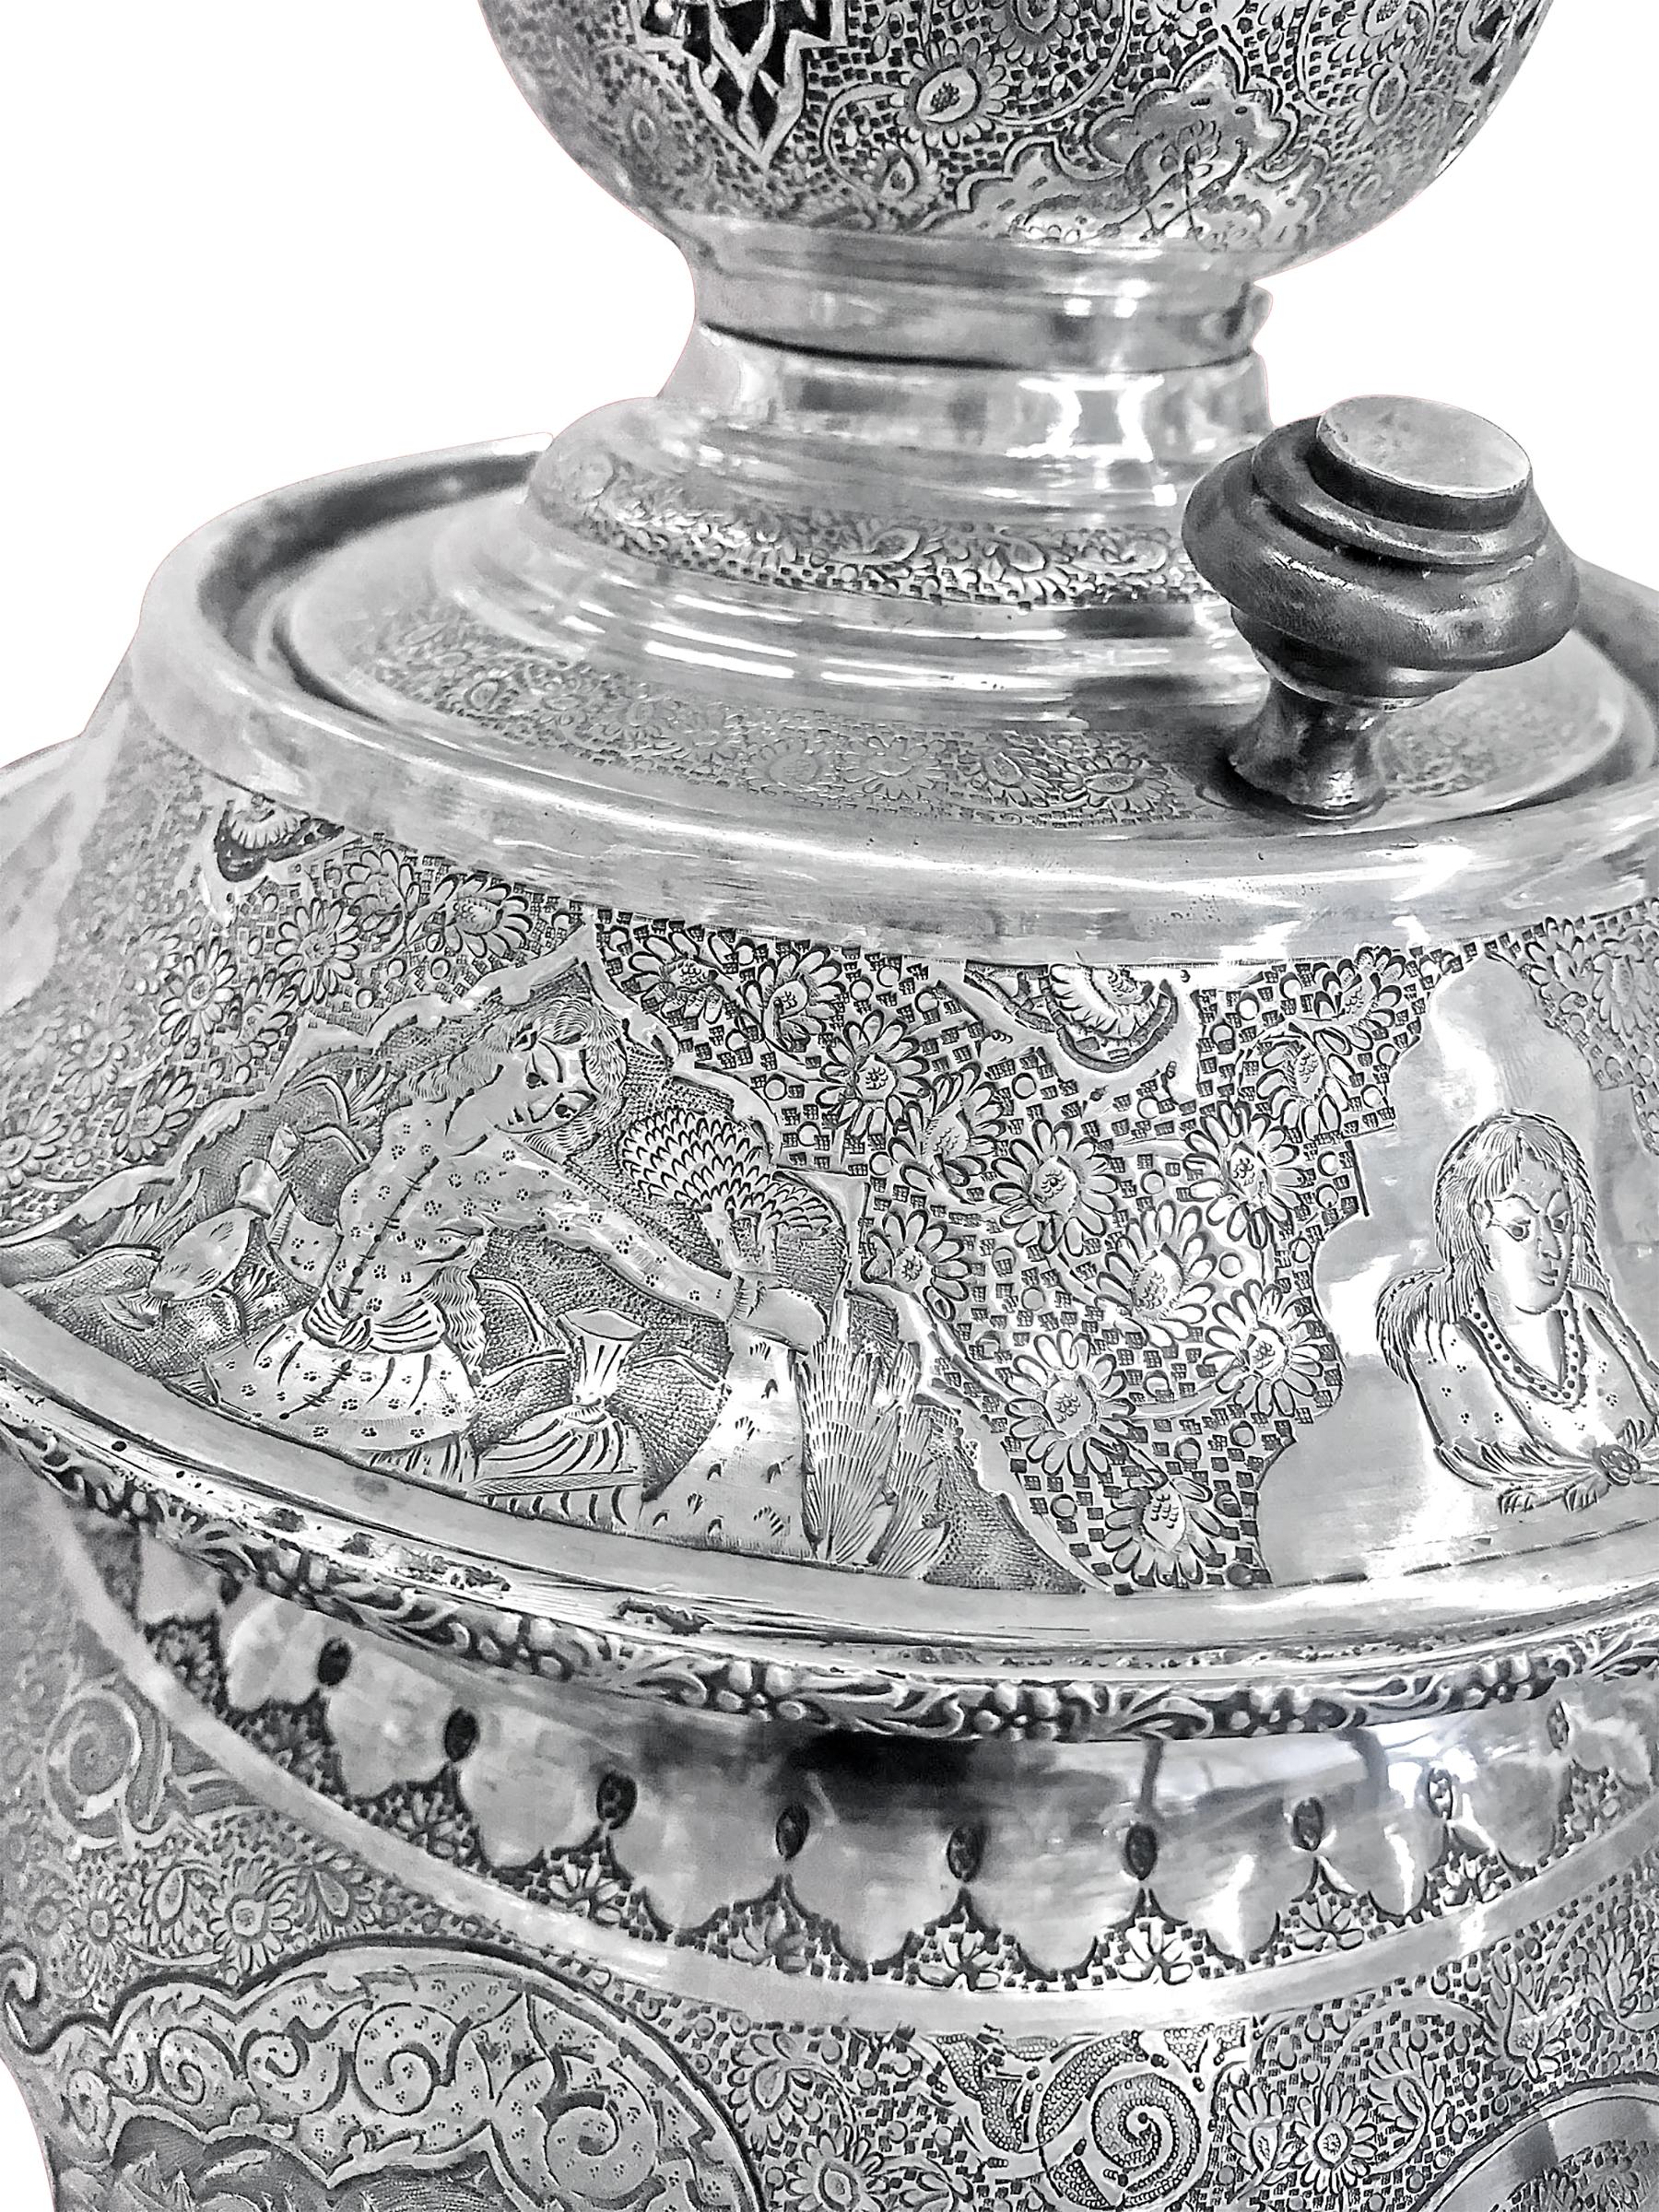 Women's or Men's Collectible 1920s Silver Samavar from Iran Handcrafted &handCarved .Rare Piece